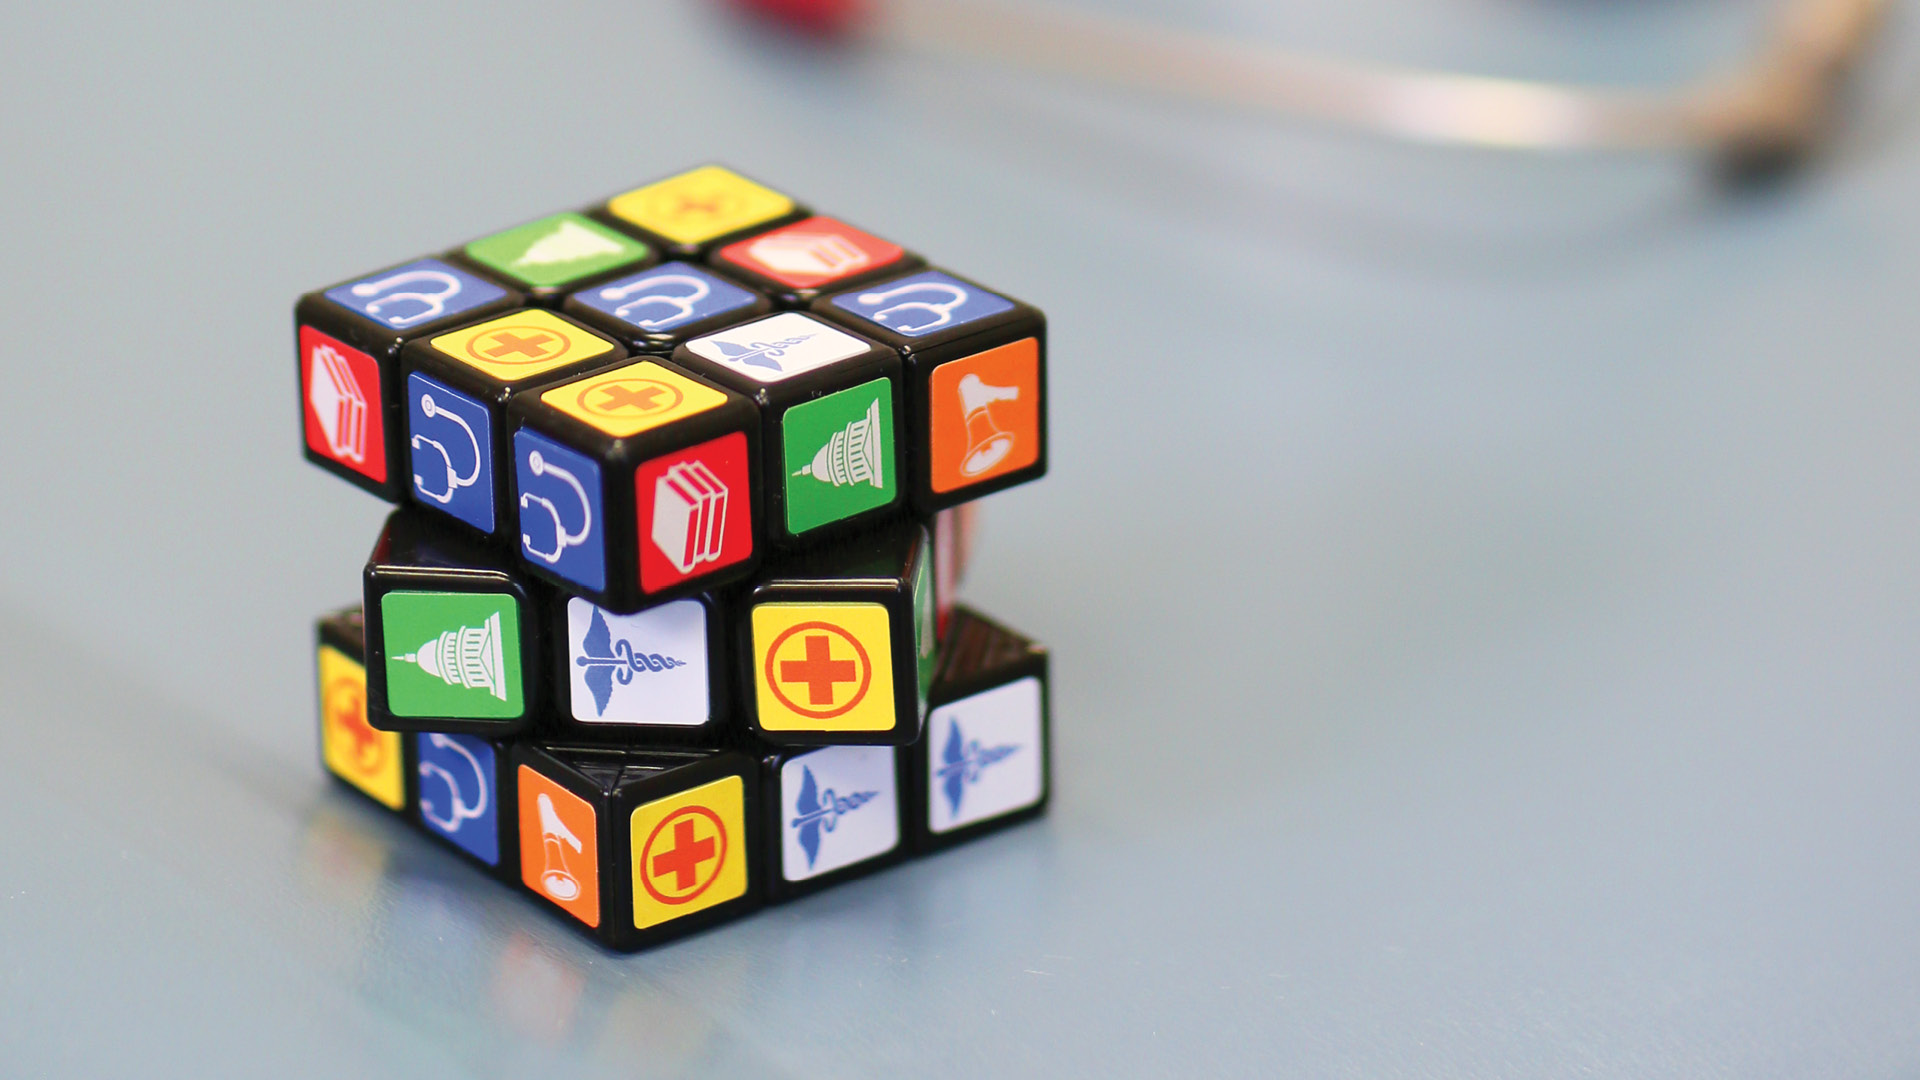 Rubik's cube with health care themed icons